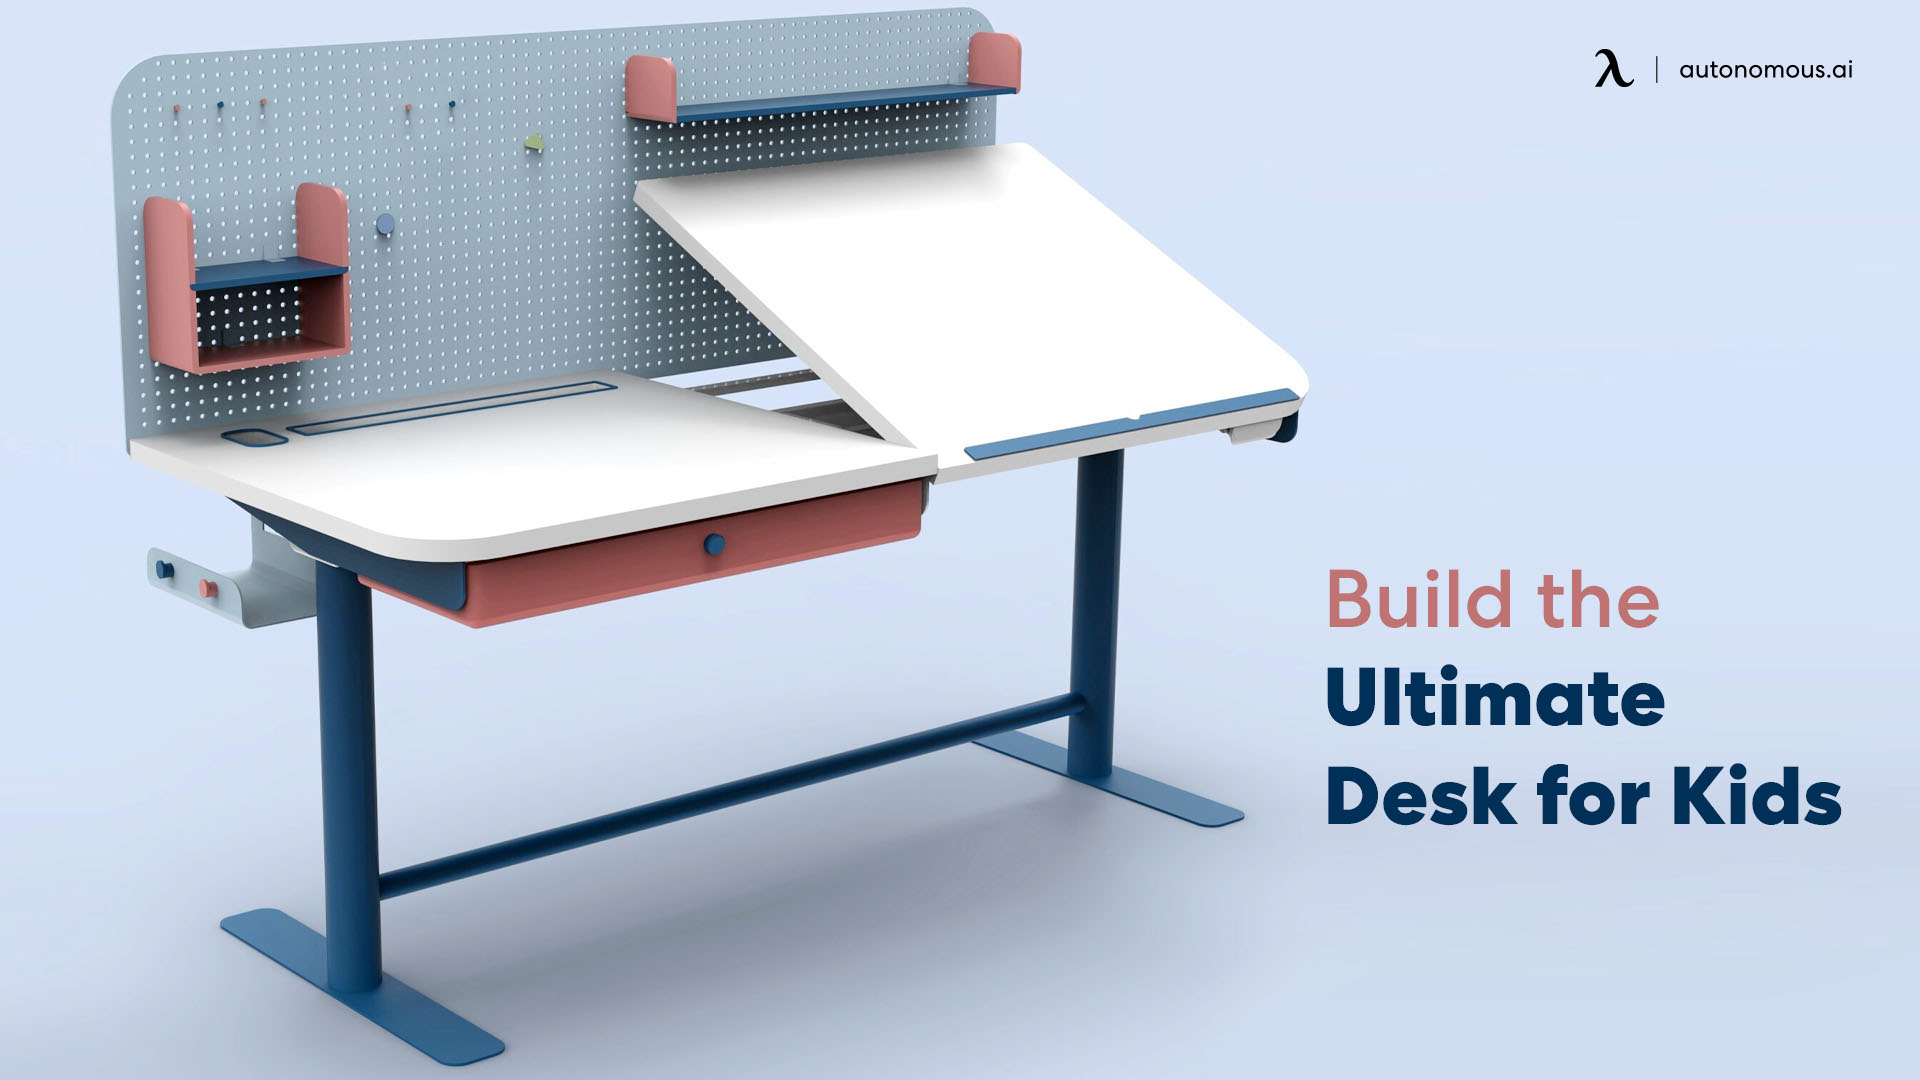 Doing It for the Kids! Our Journey Begins to Build the Ultimate Desk for Kids